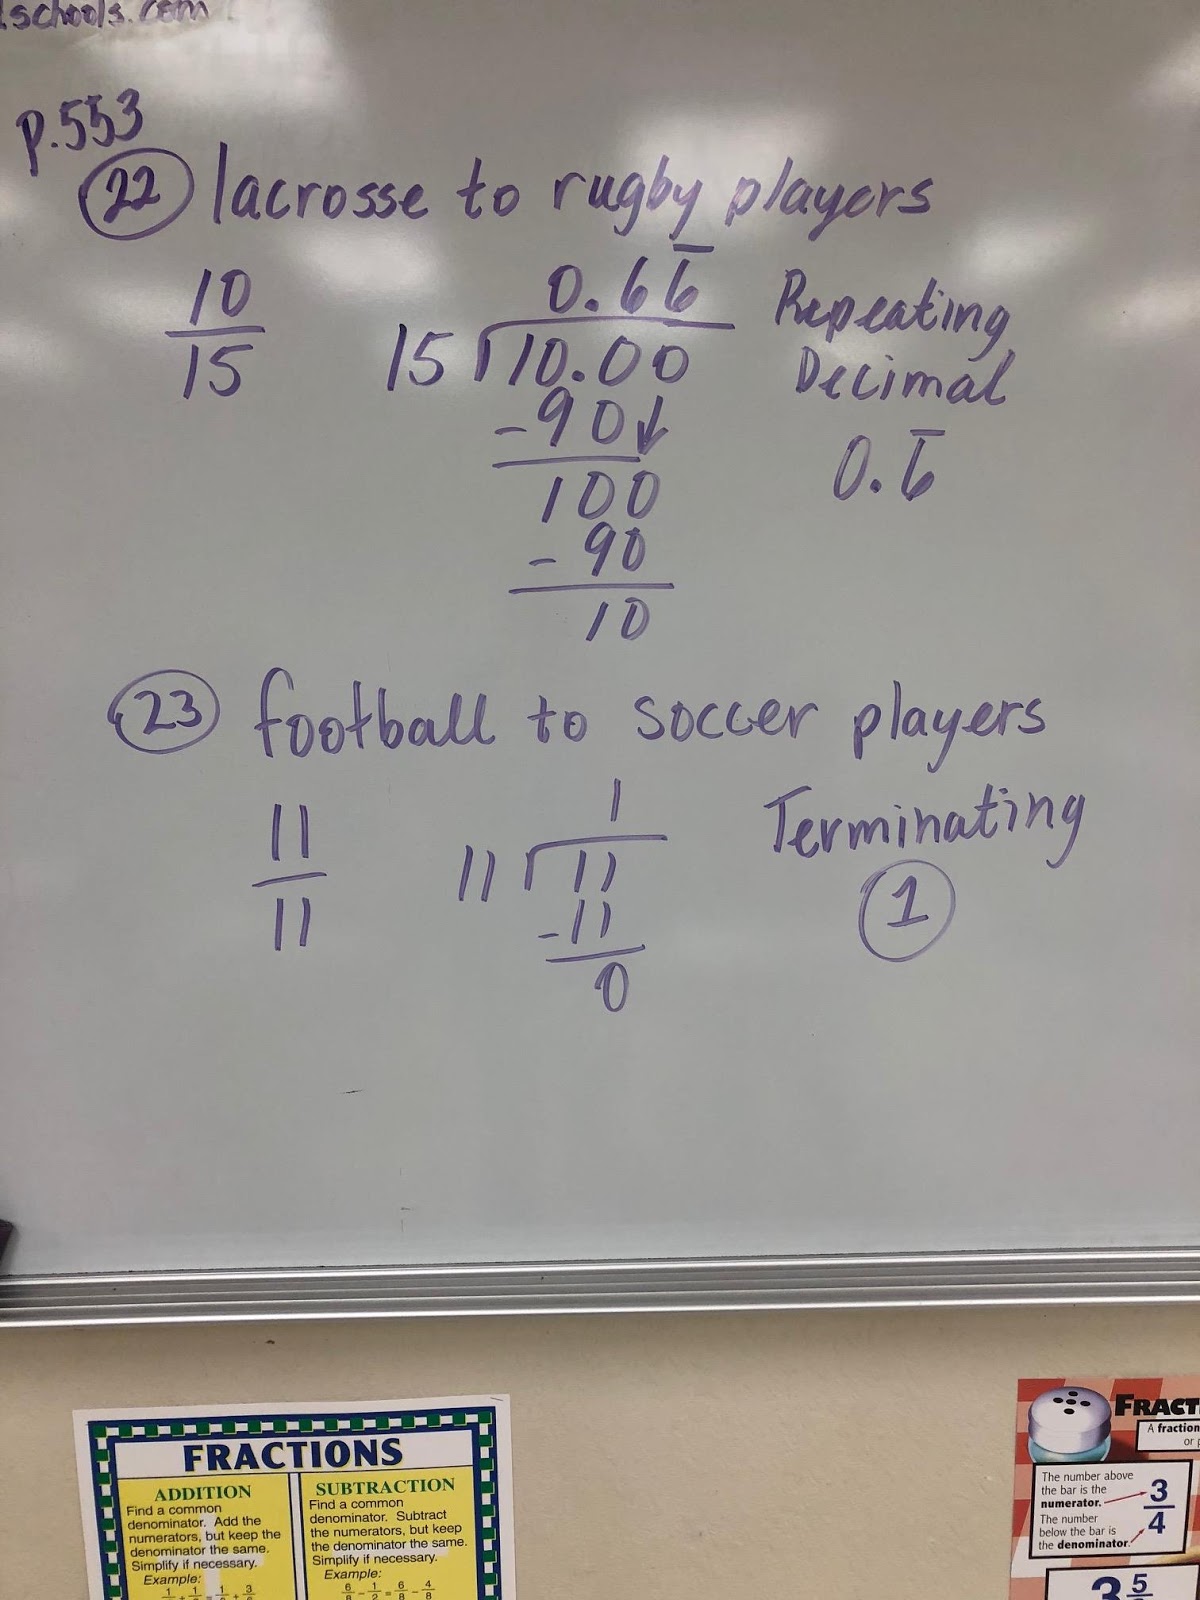 mrs-negron-6th-grade-math-class-lesson-19-1-rational-numbers-and-decimals